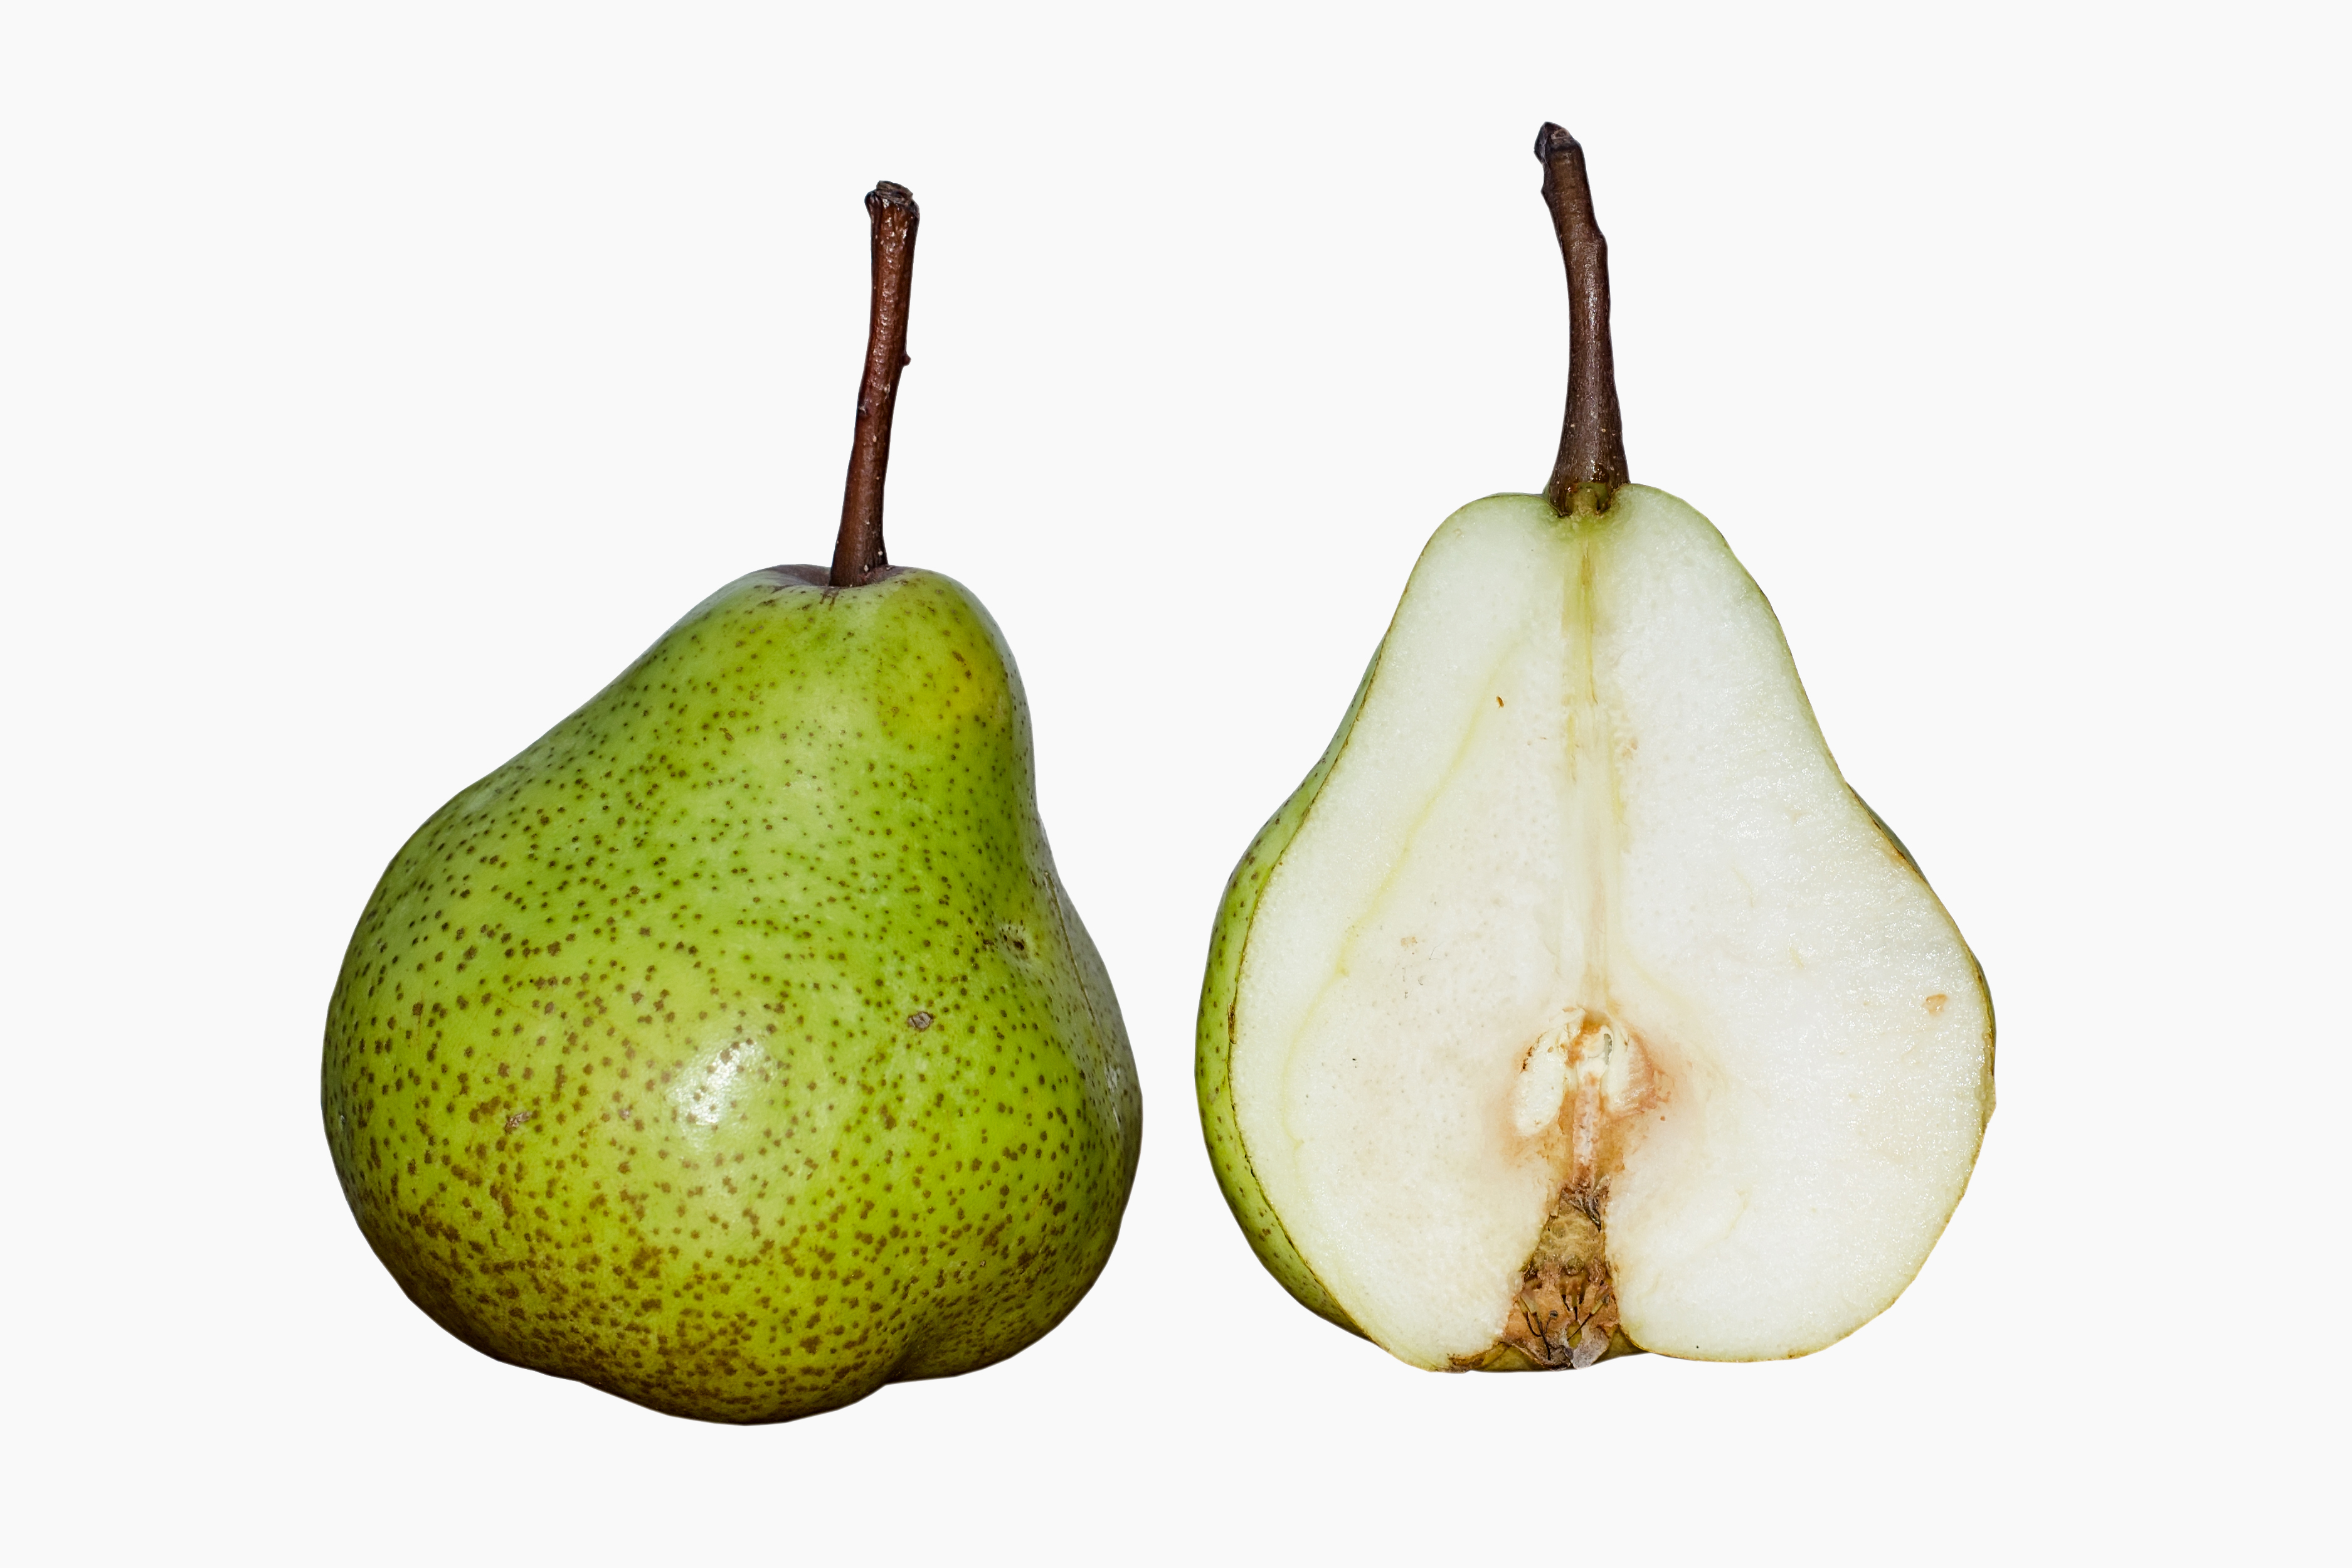 File:Pear DS.jpg - Wikimedia Commons